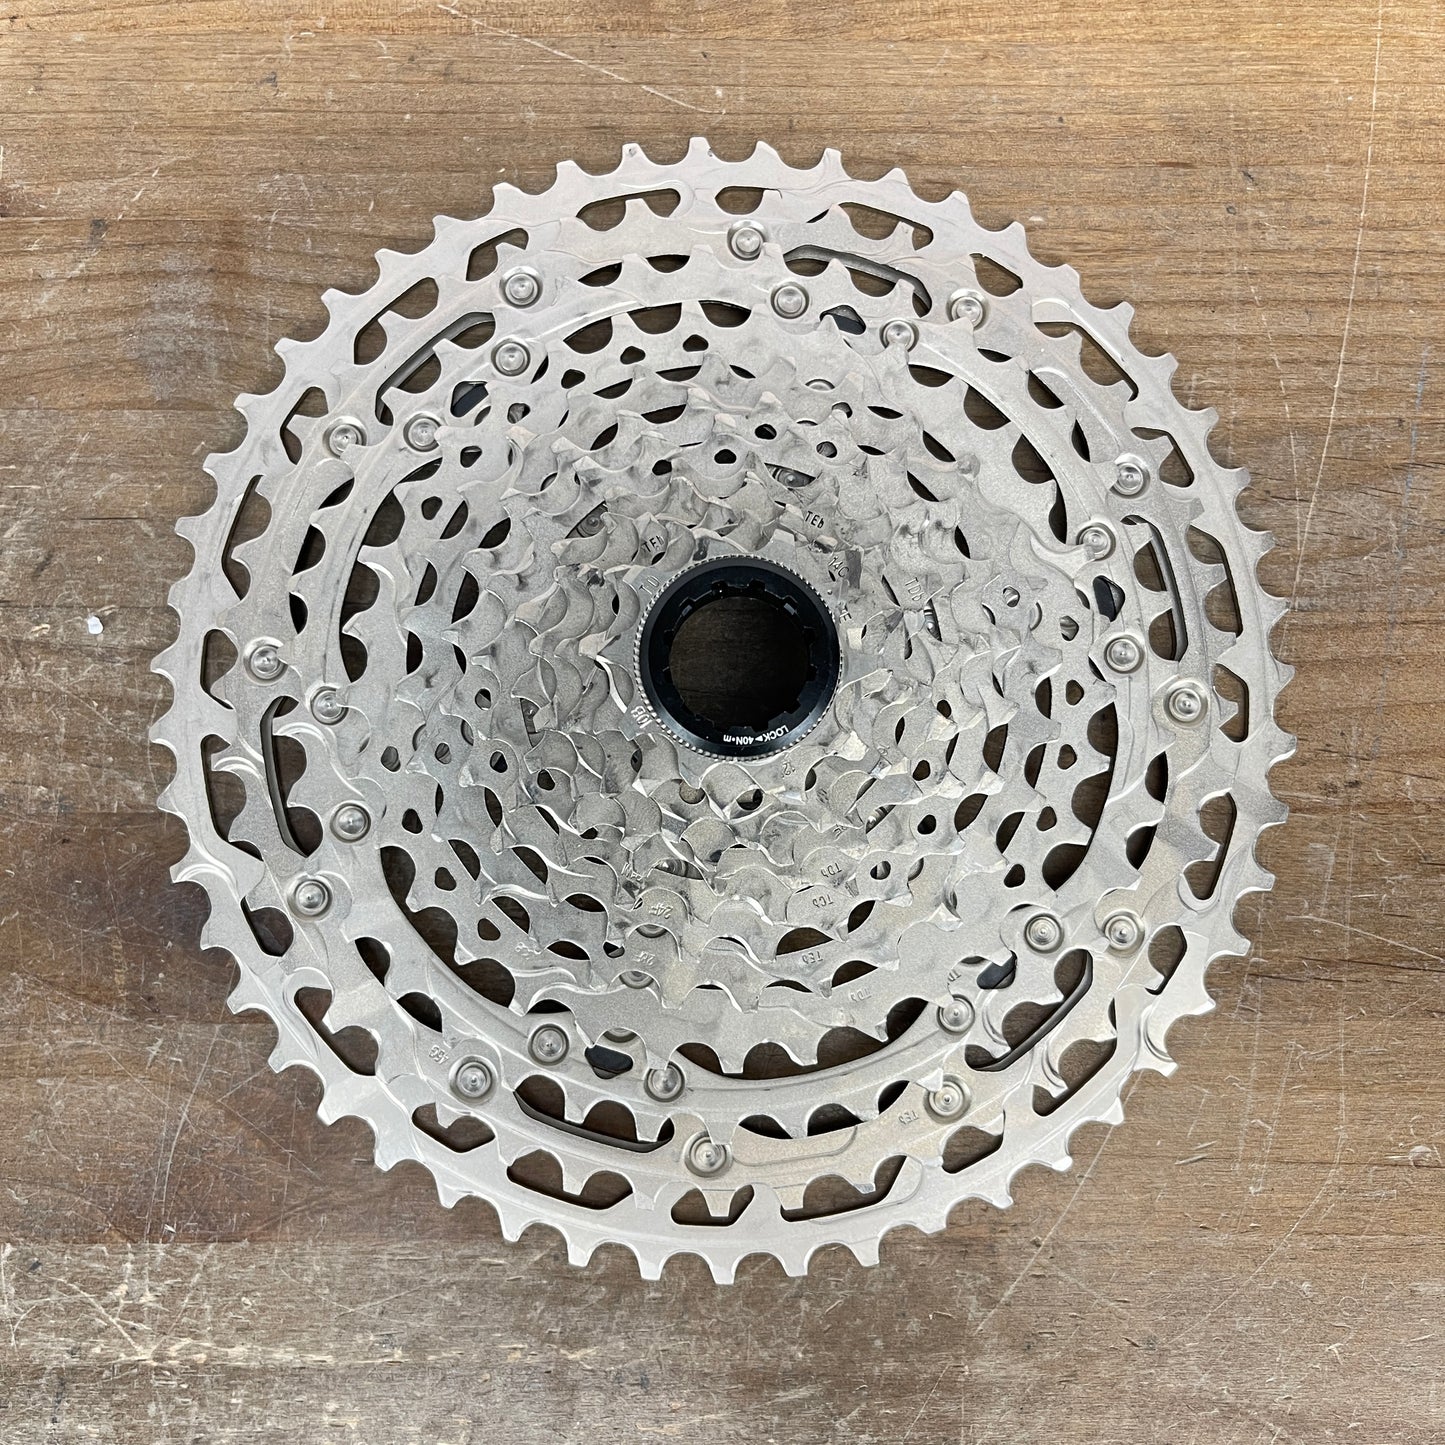 Shimano Deore CS-M6100 11-51t 12-Speed MTB Cassette "Typical Wear" 601g